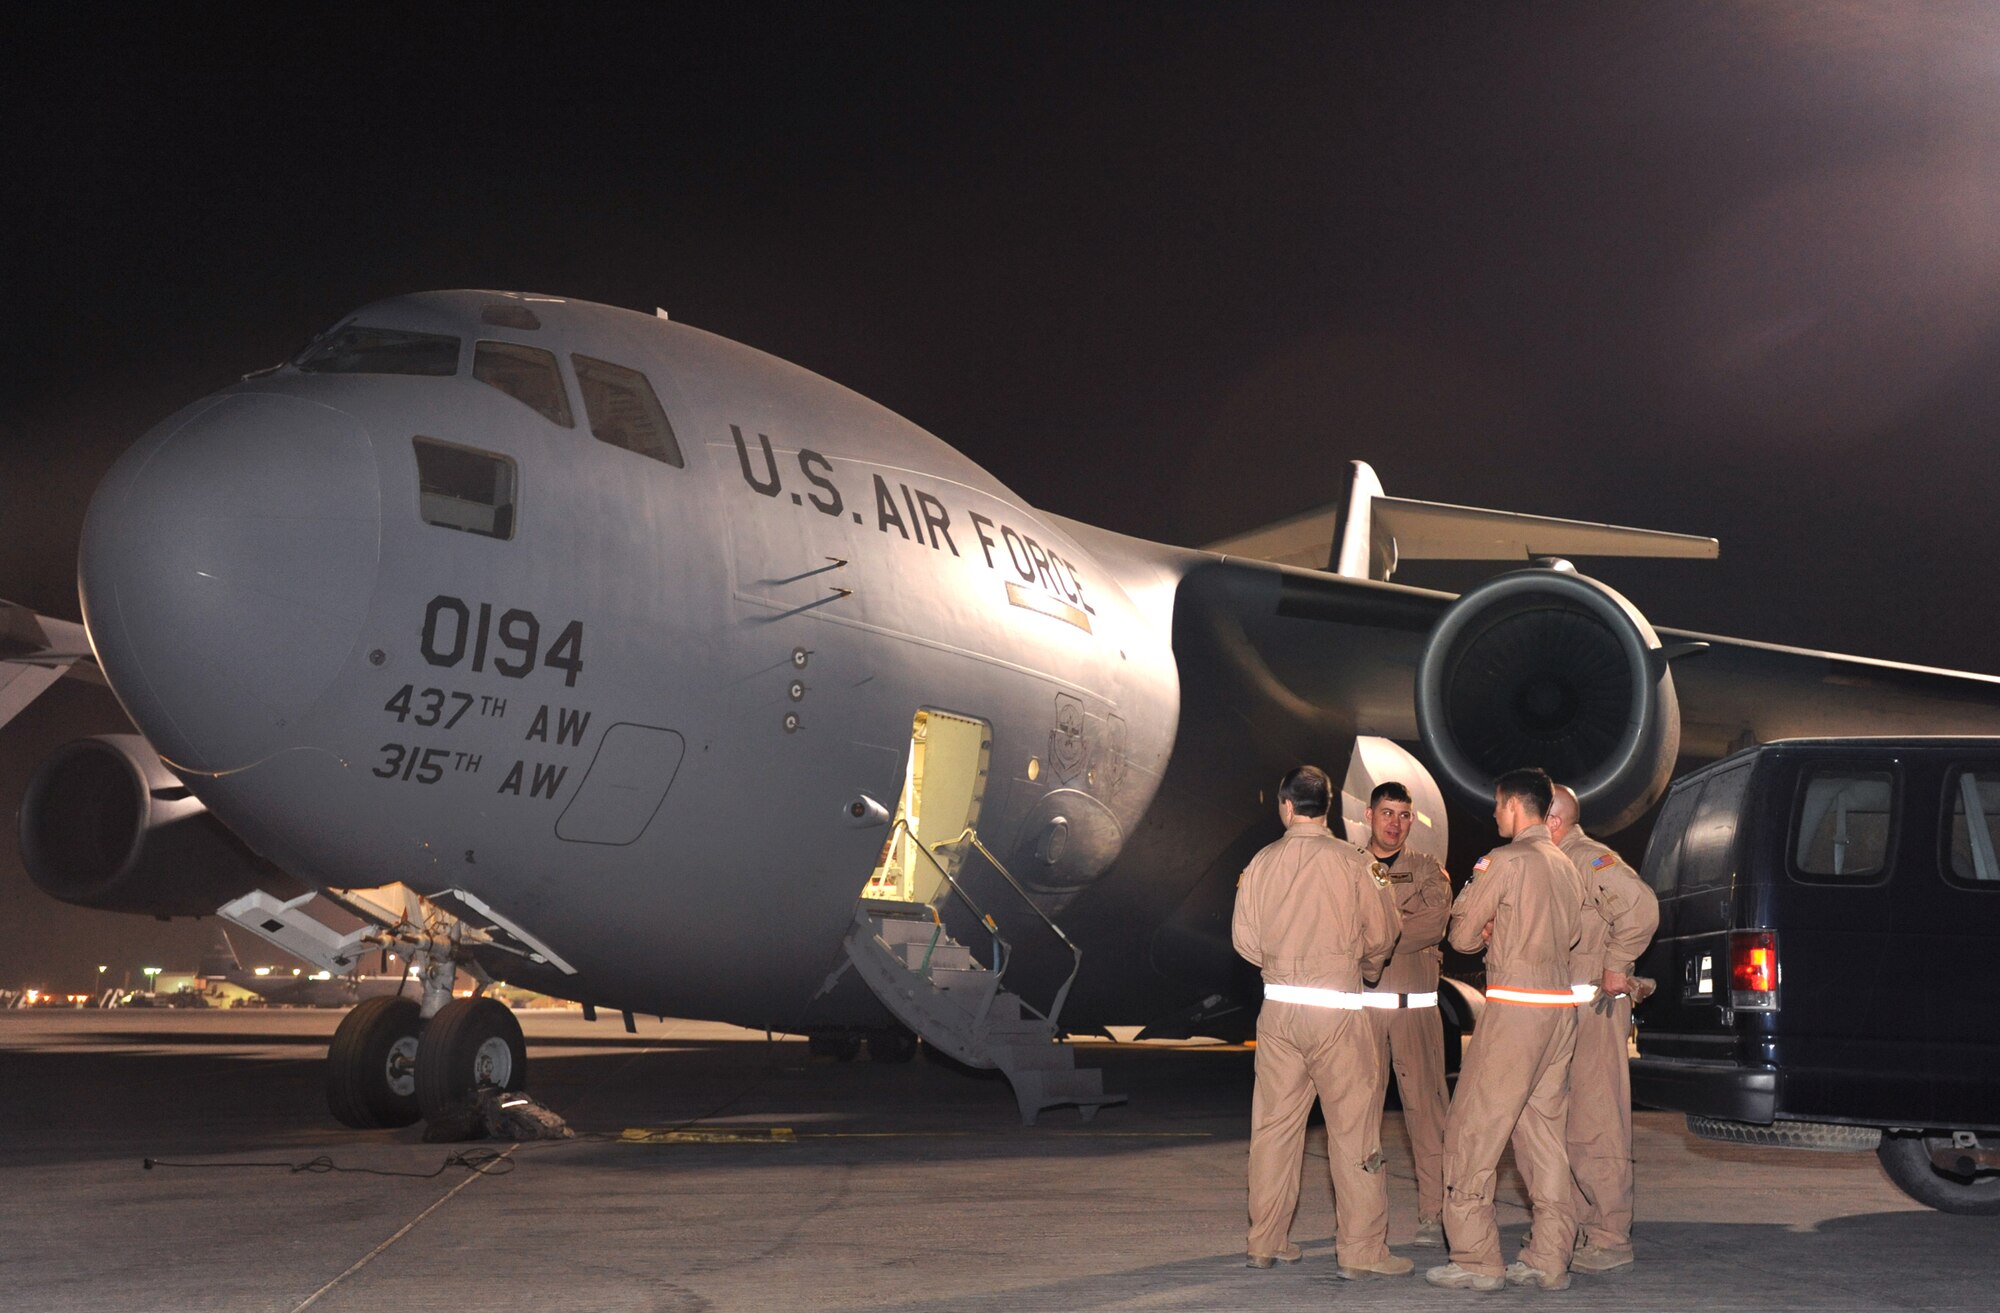 Part of the crew that helped guide a KC-135R Stratotanker, which had lost navigational capability over Afghanistan, to a safe landing at Bagram Air Base, Afghanistan on March 16, gather in front of their C-17 Globemaster III here, March 21, 2009.  All are with the 816th Expeditionary Airlift Squadron and are deployed at an undisclosed location in Southwest Asia from Charleston Air Force Base, S.C., in support of Operations Iraqi and Enduring Freedom and Combined Joint Task Force - Horn of Africa.  (U.S. Air Force Photo by Staff Sgt. Joshua Garcia/released)